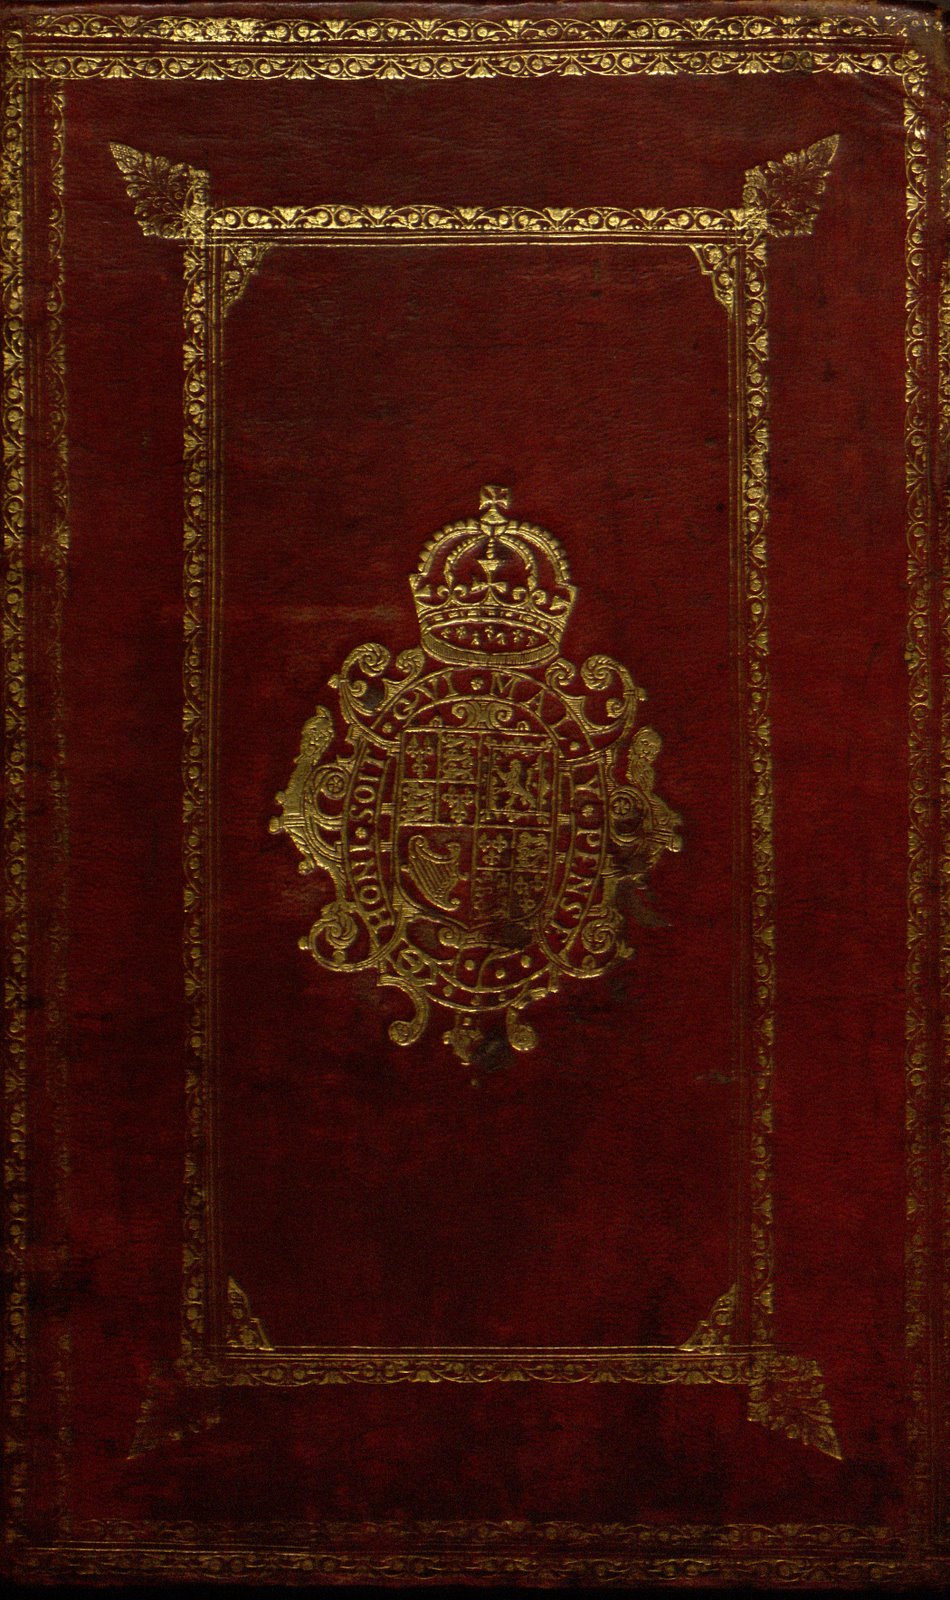 King Charles II armorial binding for Brief animadversions on amendments of…the institvtes of the lawes of England